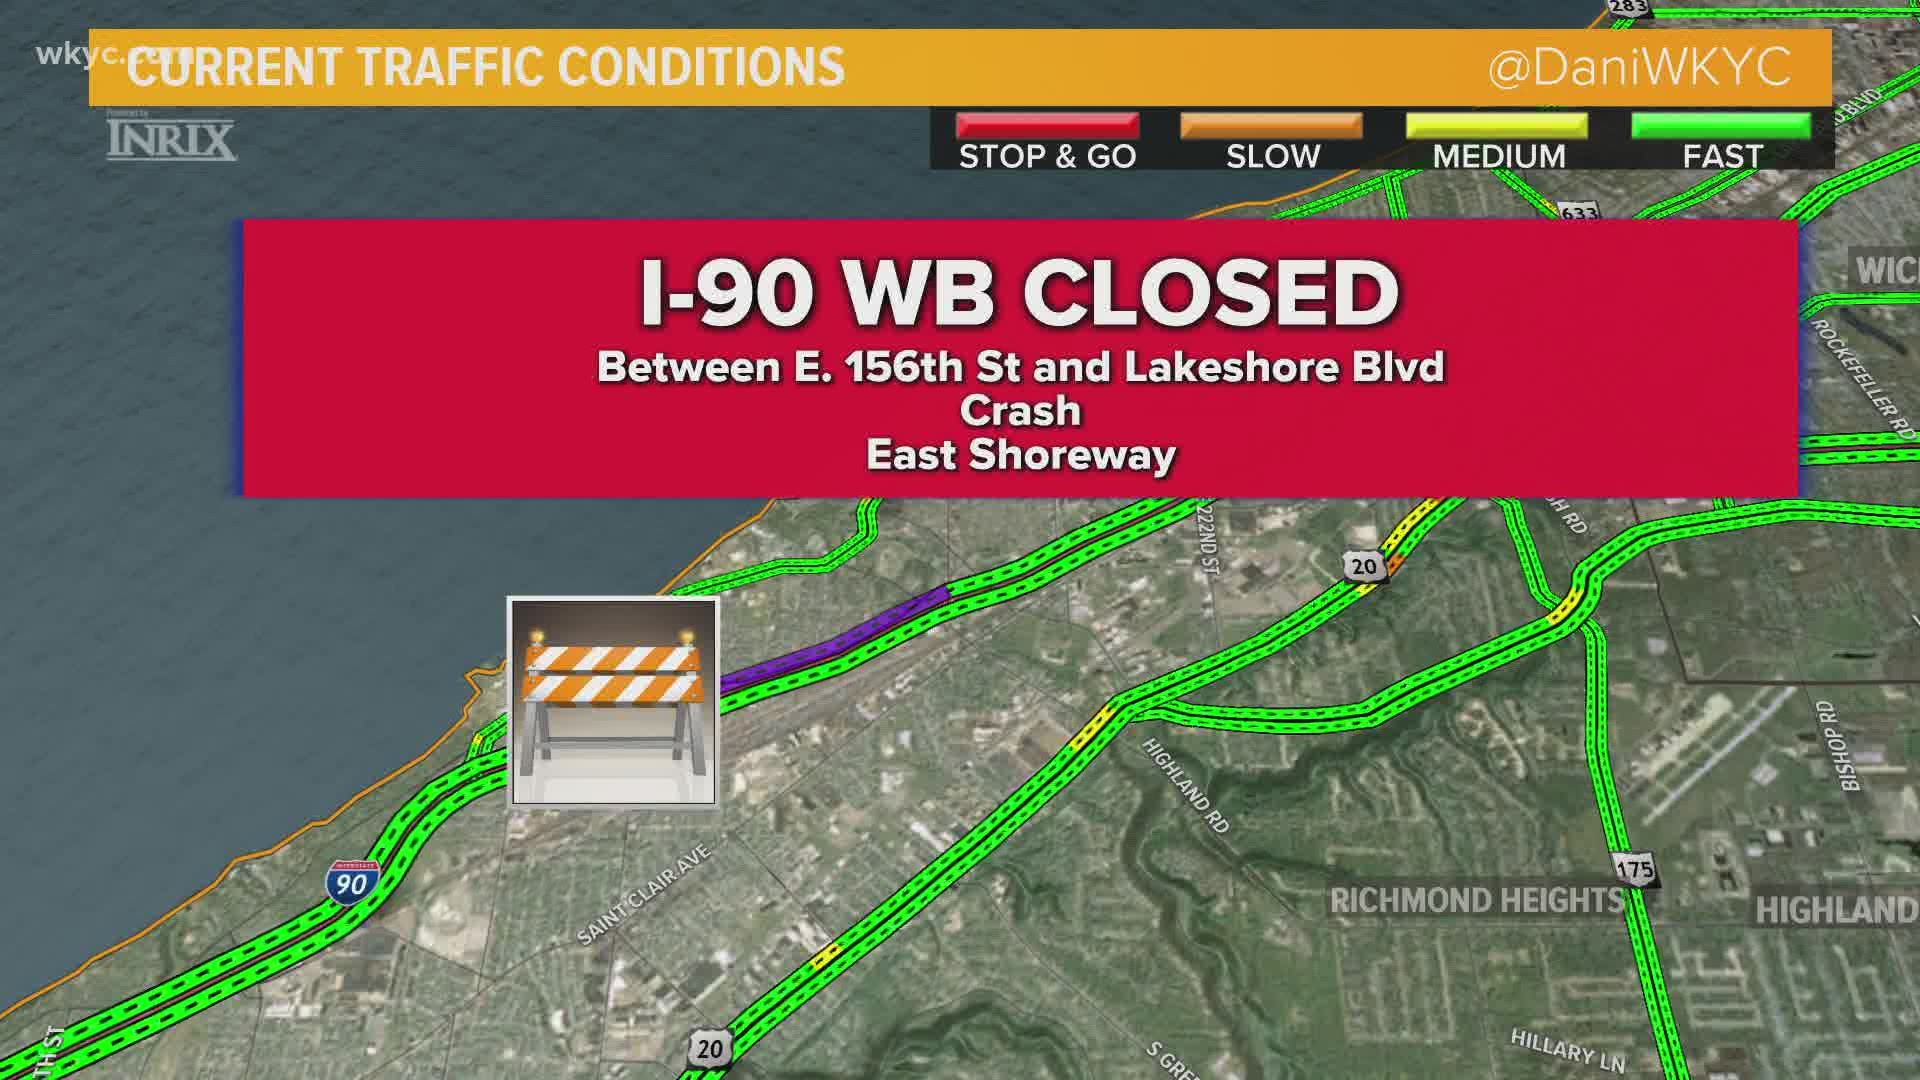 July 8, 2020: There’s an early morning traffic alert in place as a portion of I-90 West has been closed due to a crash. The I-90 closure is at E. 156th Street.